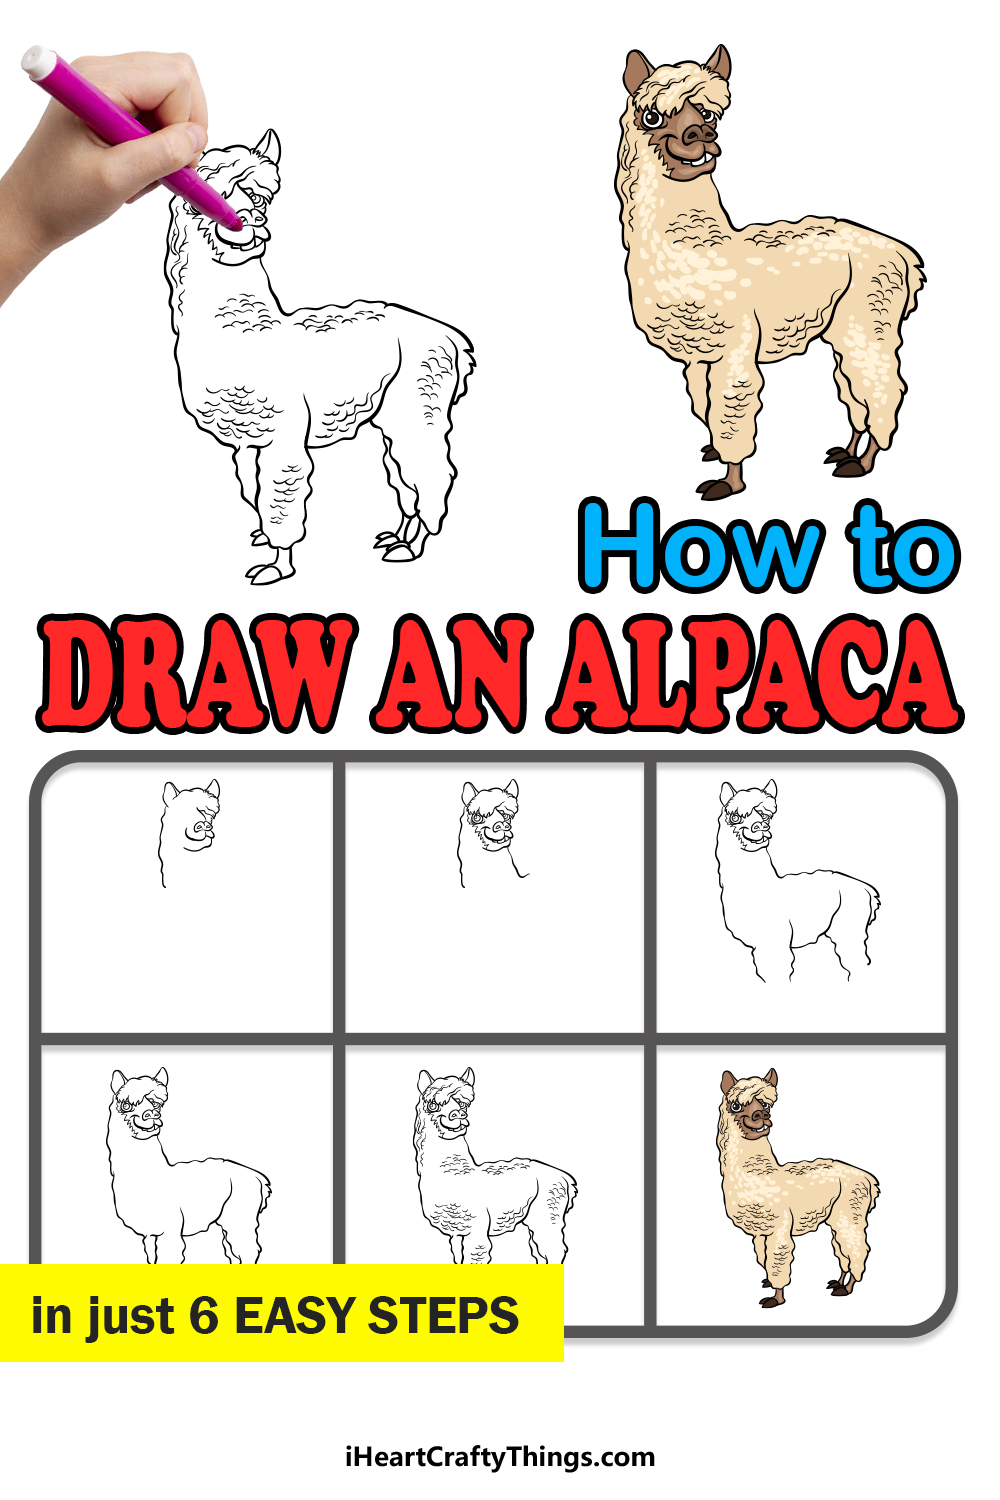 how to draw An Alpaca in 6 easy steps